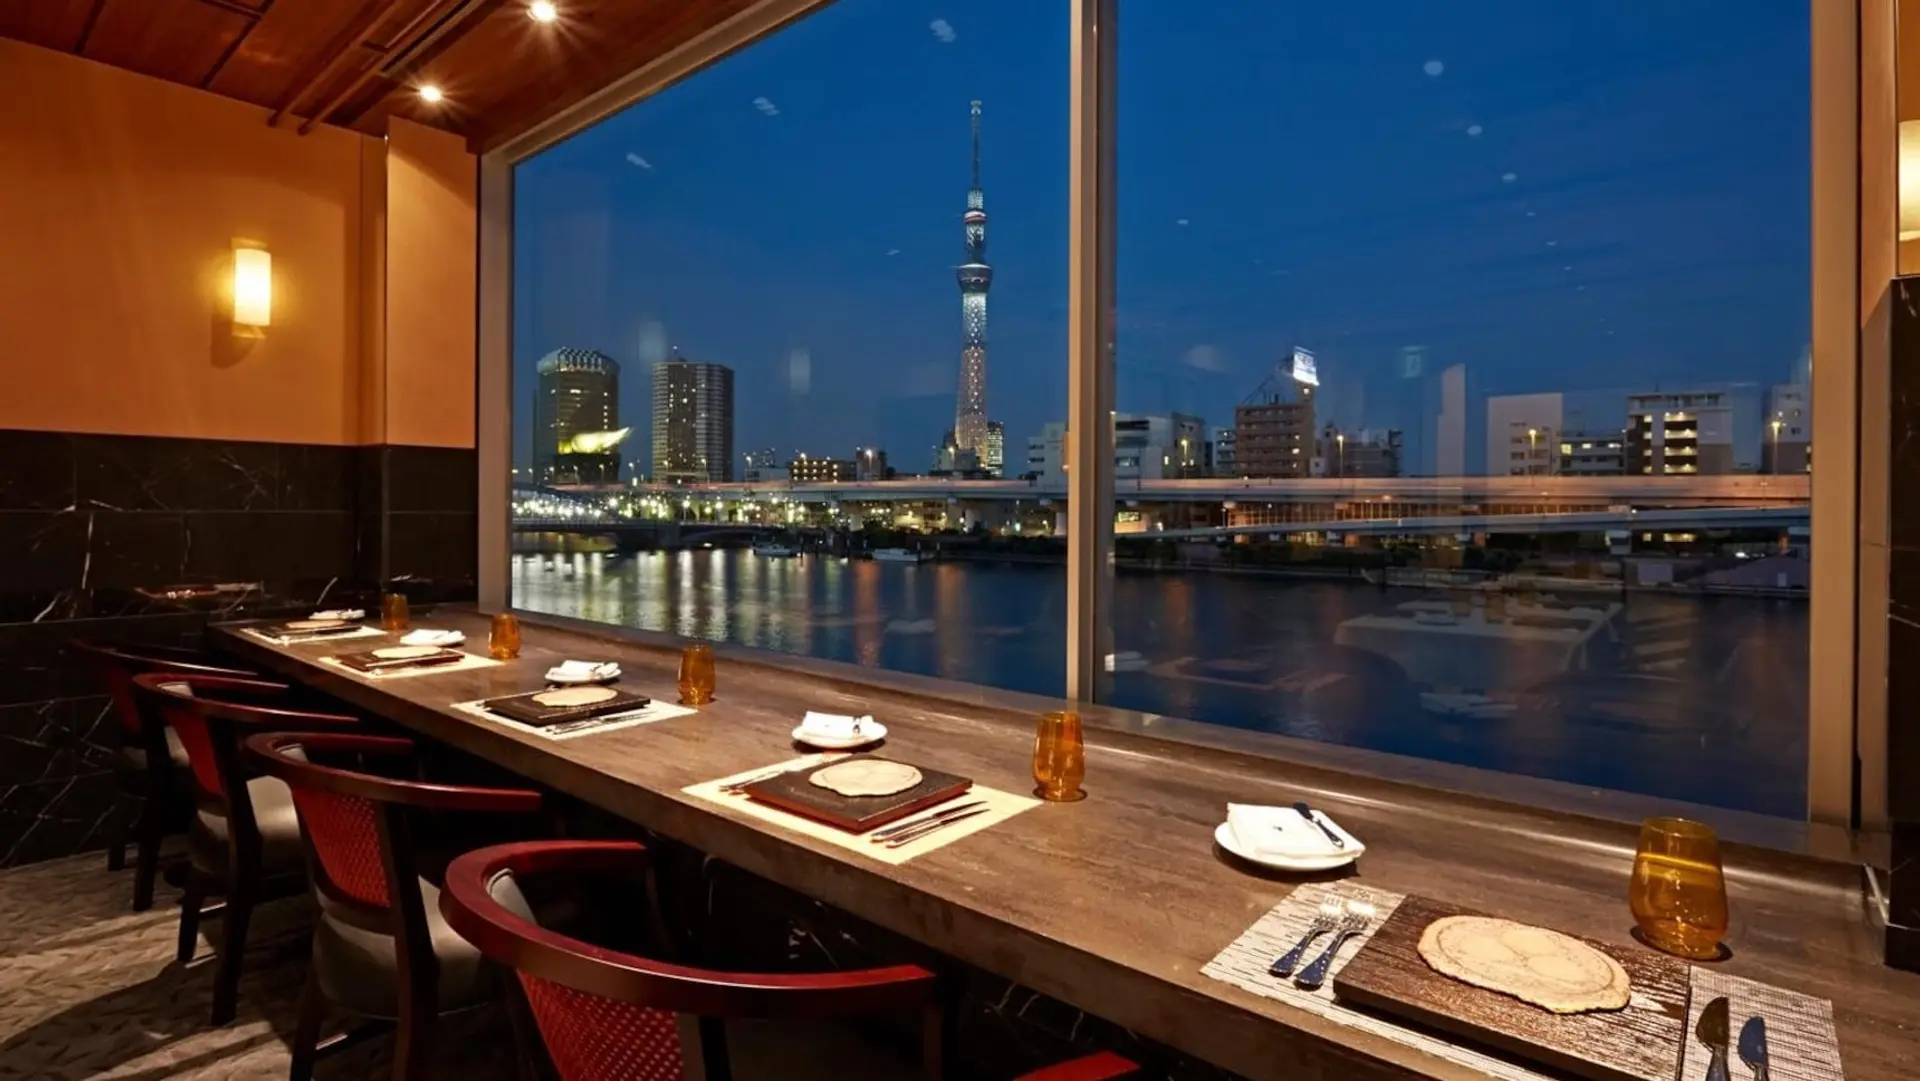 View eating area at night time with red chairs, view to water and Tokyo at Yakitori Omino.